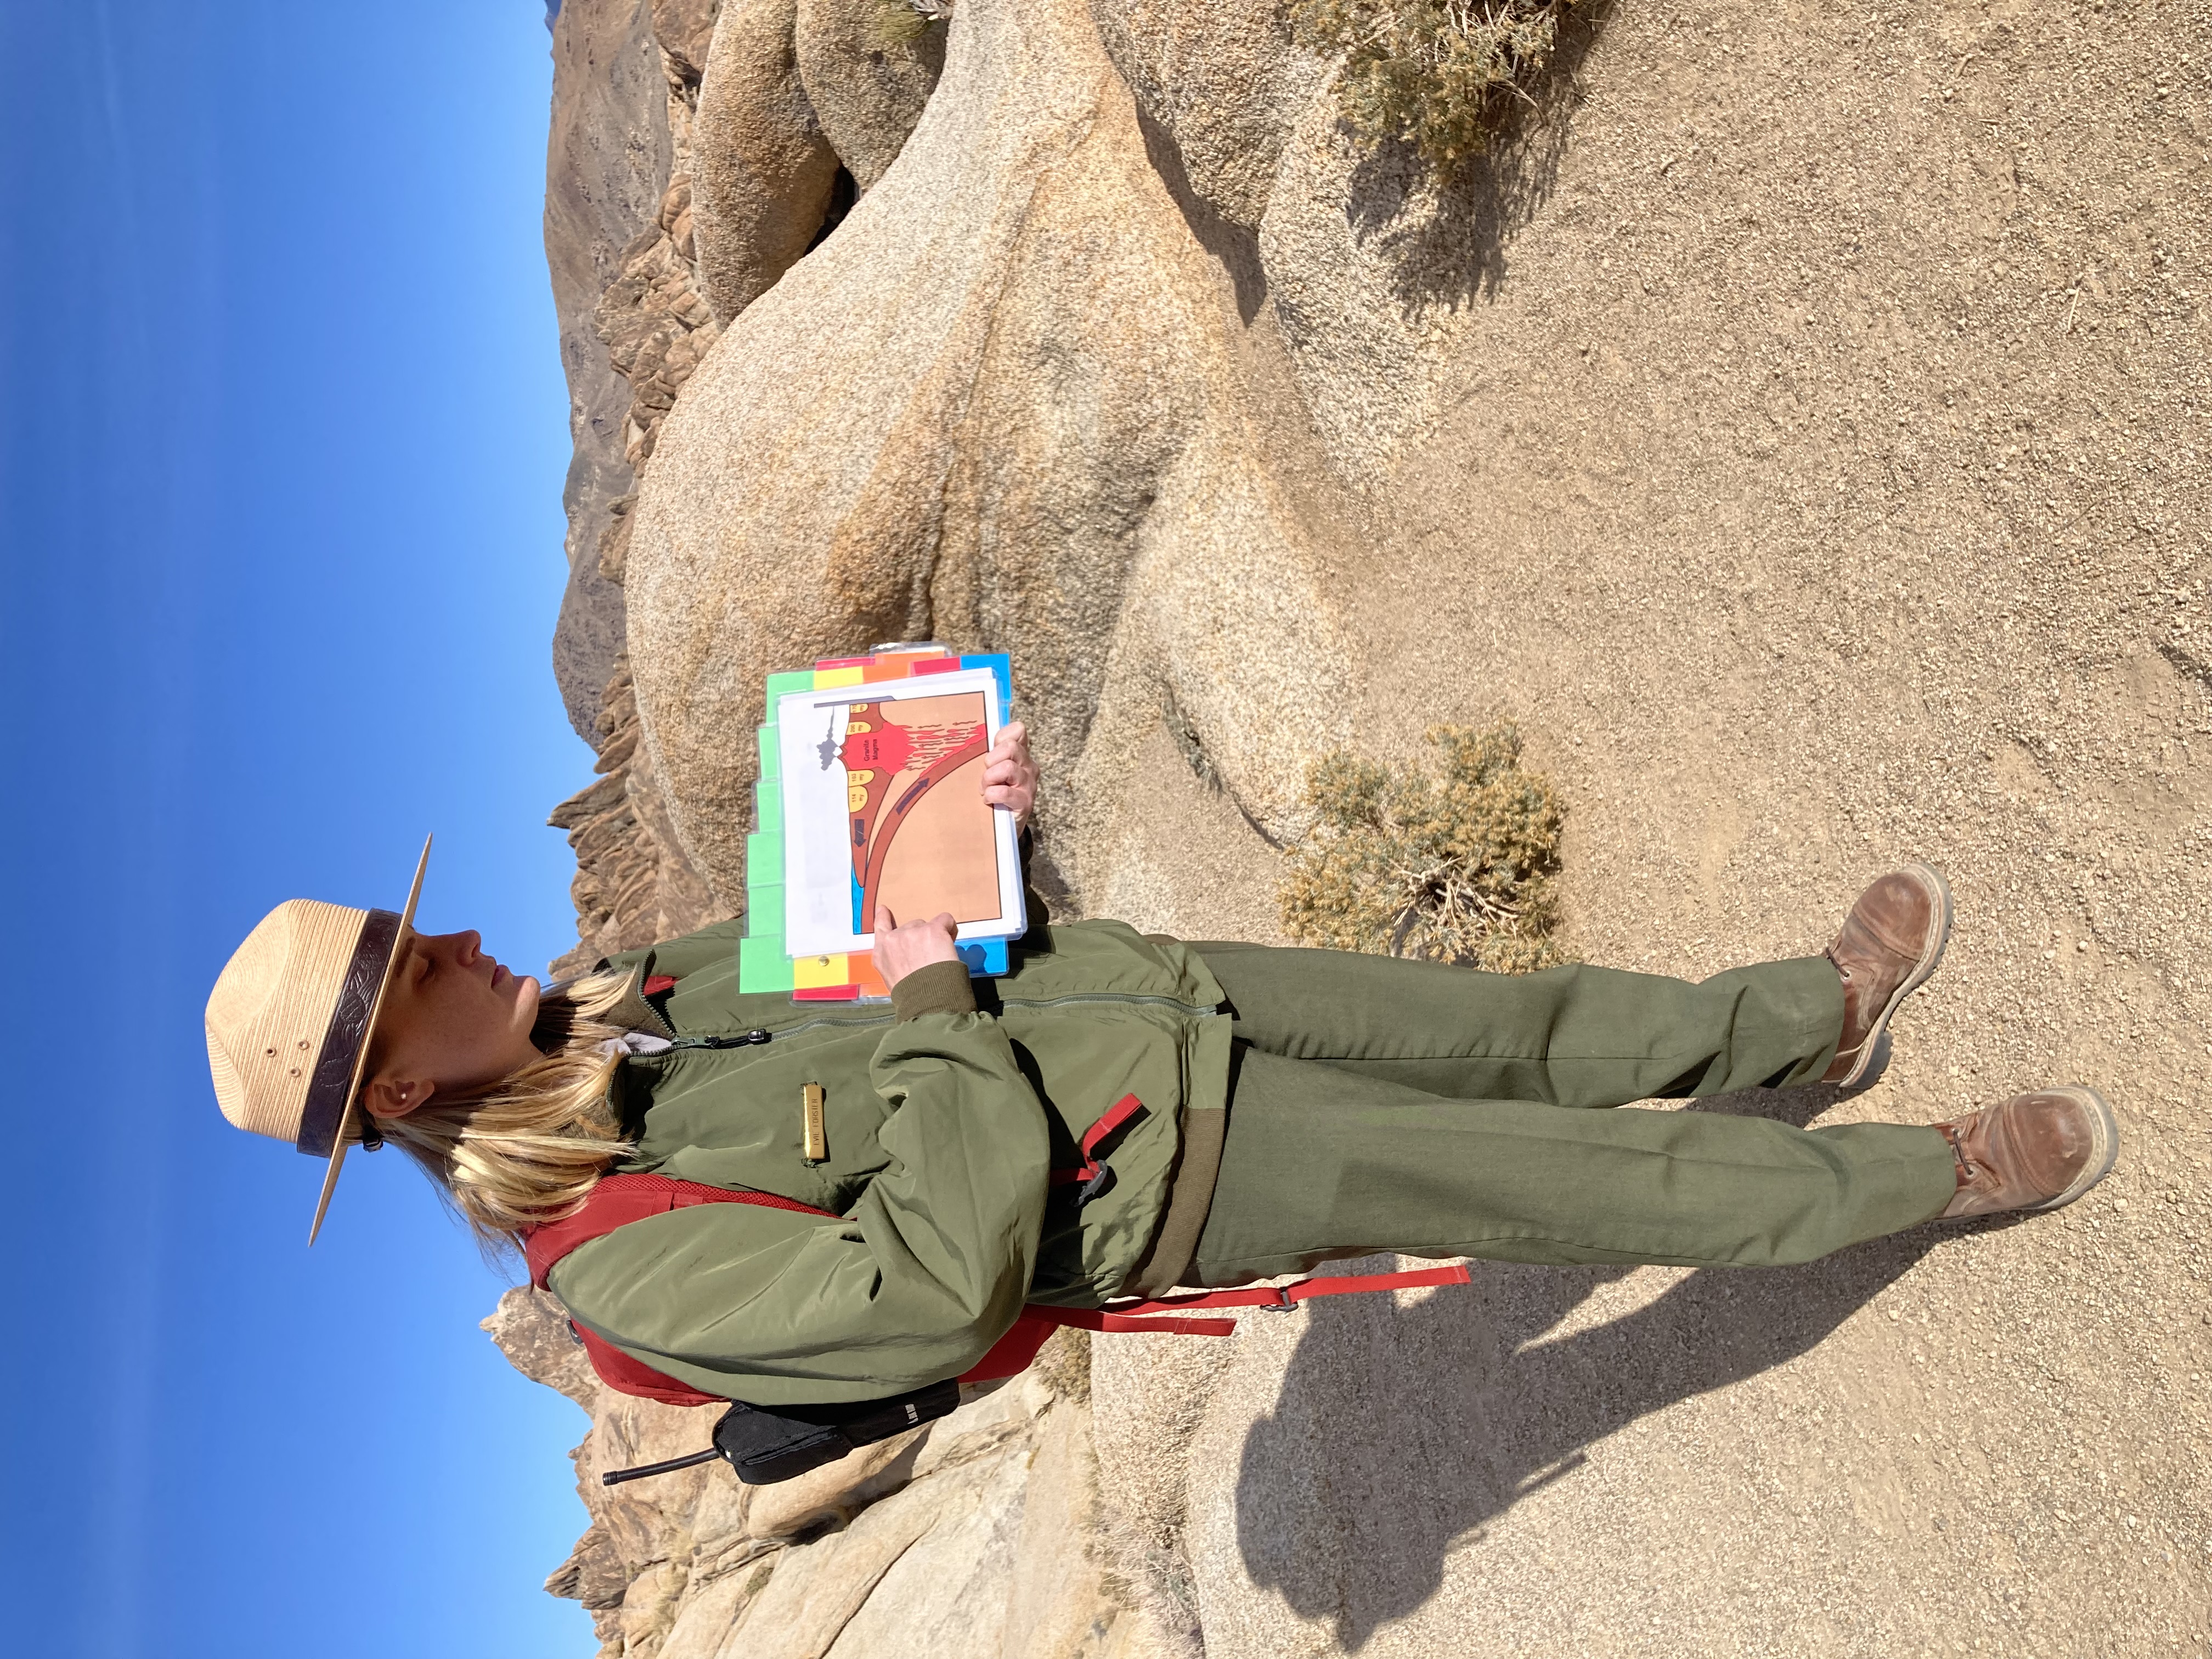 A park ranger holds a diagram showing volcanic processes in the brown granite rocks of the Alabama Hills National Scenic Area.